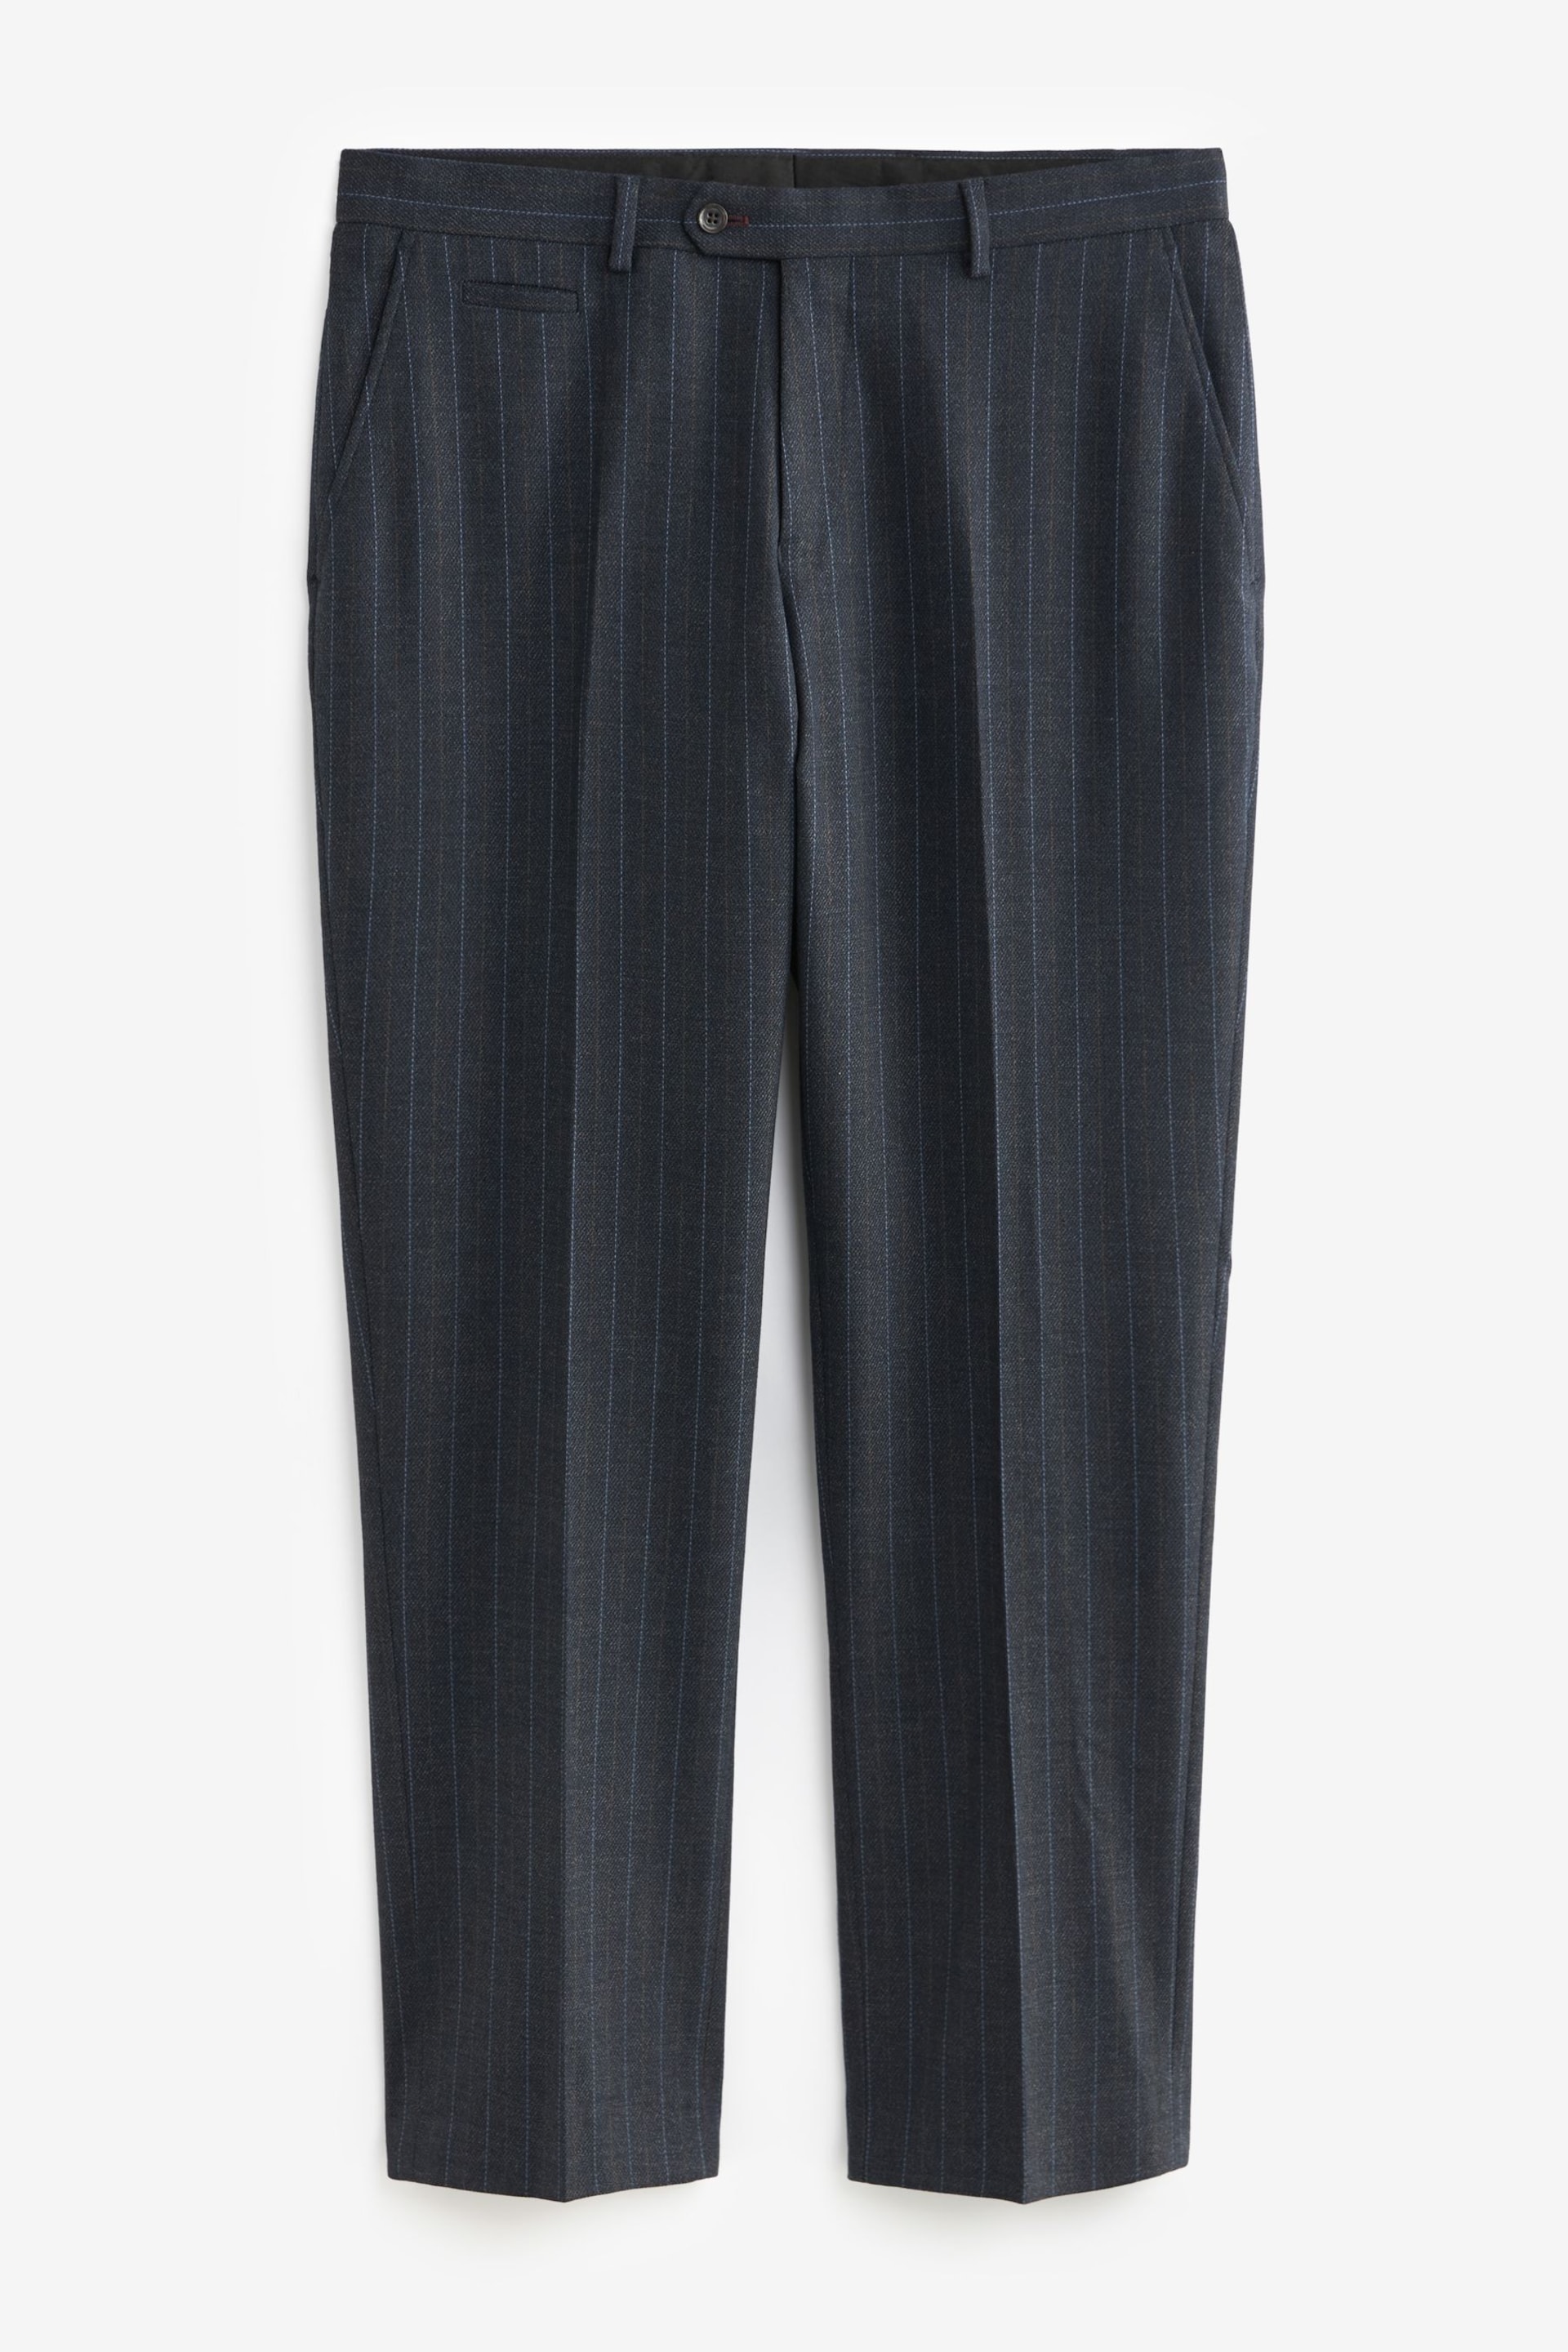 Navy Blue Tailored Fit Stripe Suit Trousers - Image 4 of 9